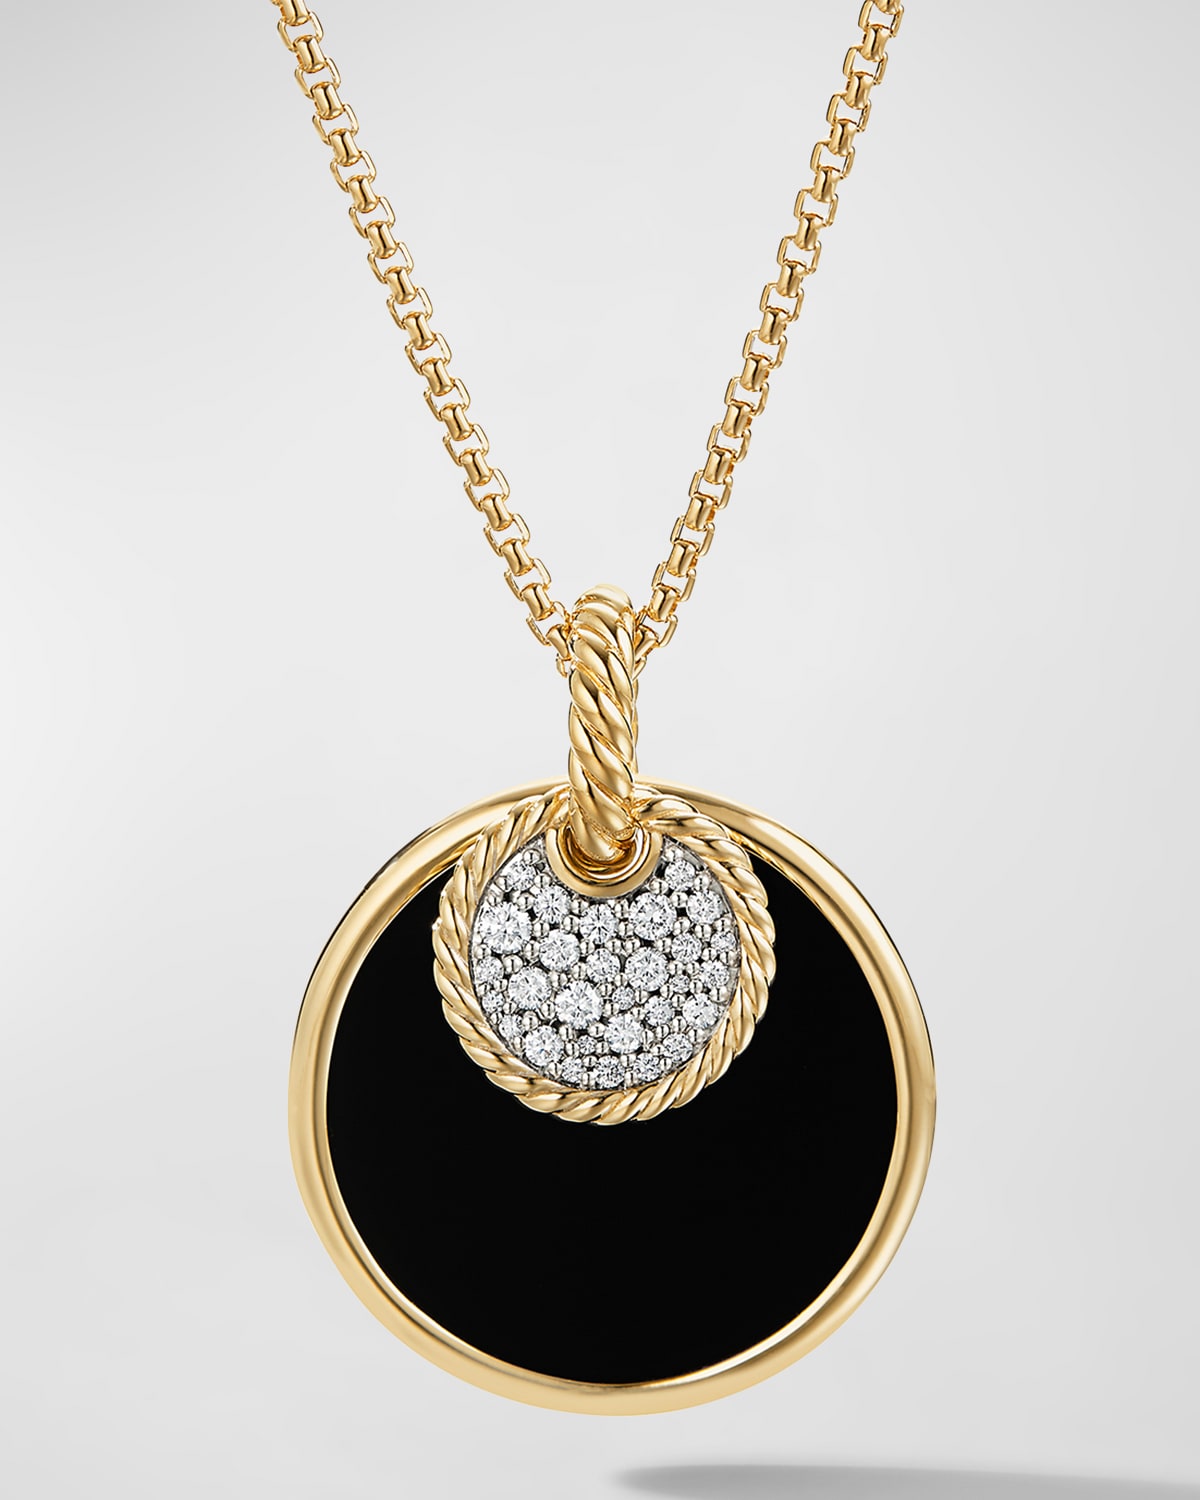 DAVID YURMAN DY ELEMENTS CONVERTIBLE PENDANT NECKLACE IN 18K YELLOW GOLD WITH BLACK ONYX AND MOTHER-OF-PEARL AND 